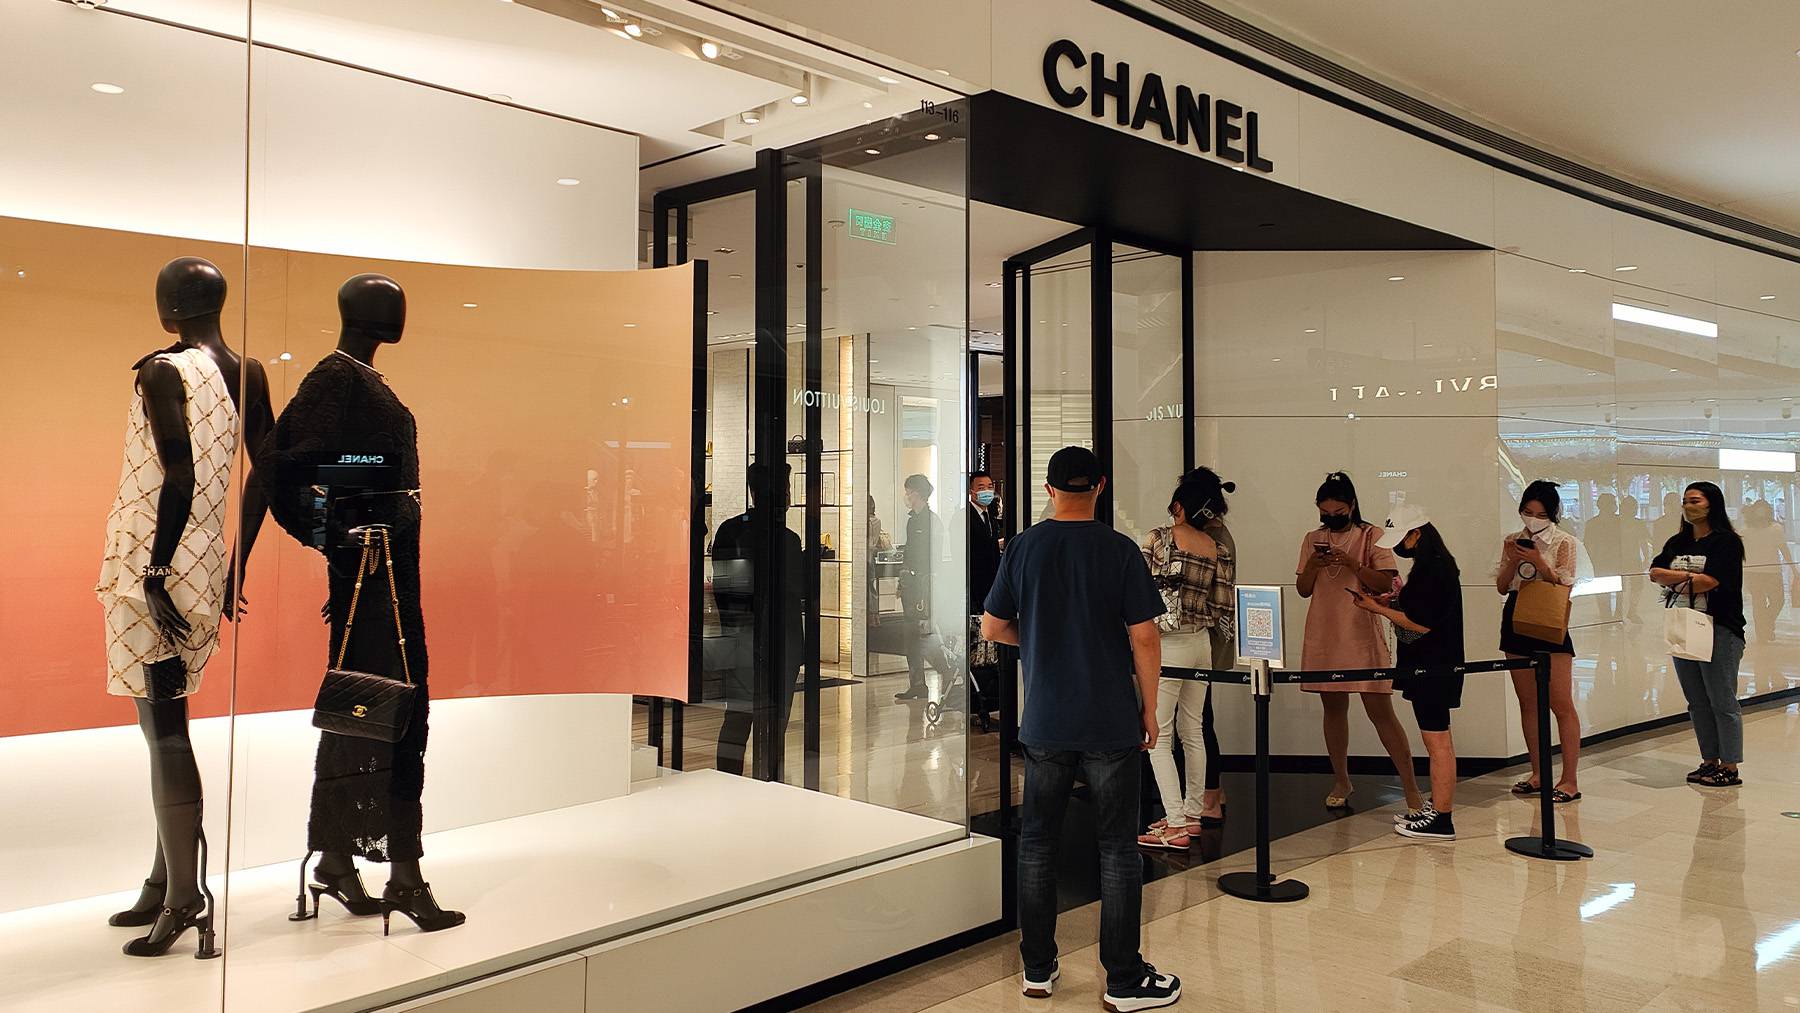 A Chanel store in Shanghai with customers queuing outside the store extrance.